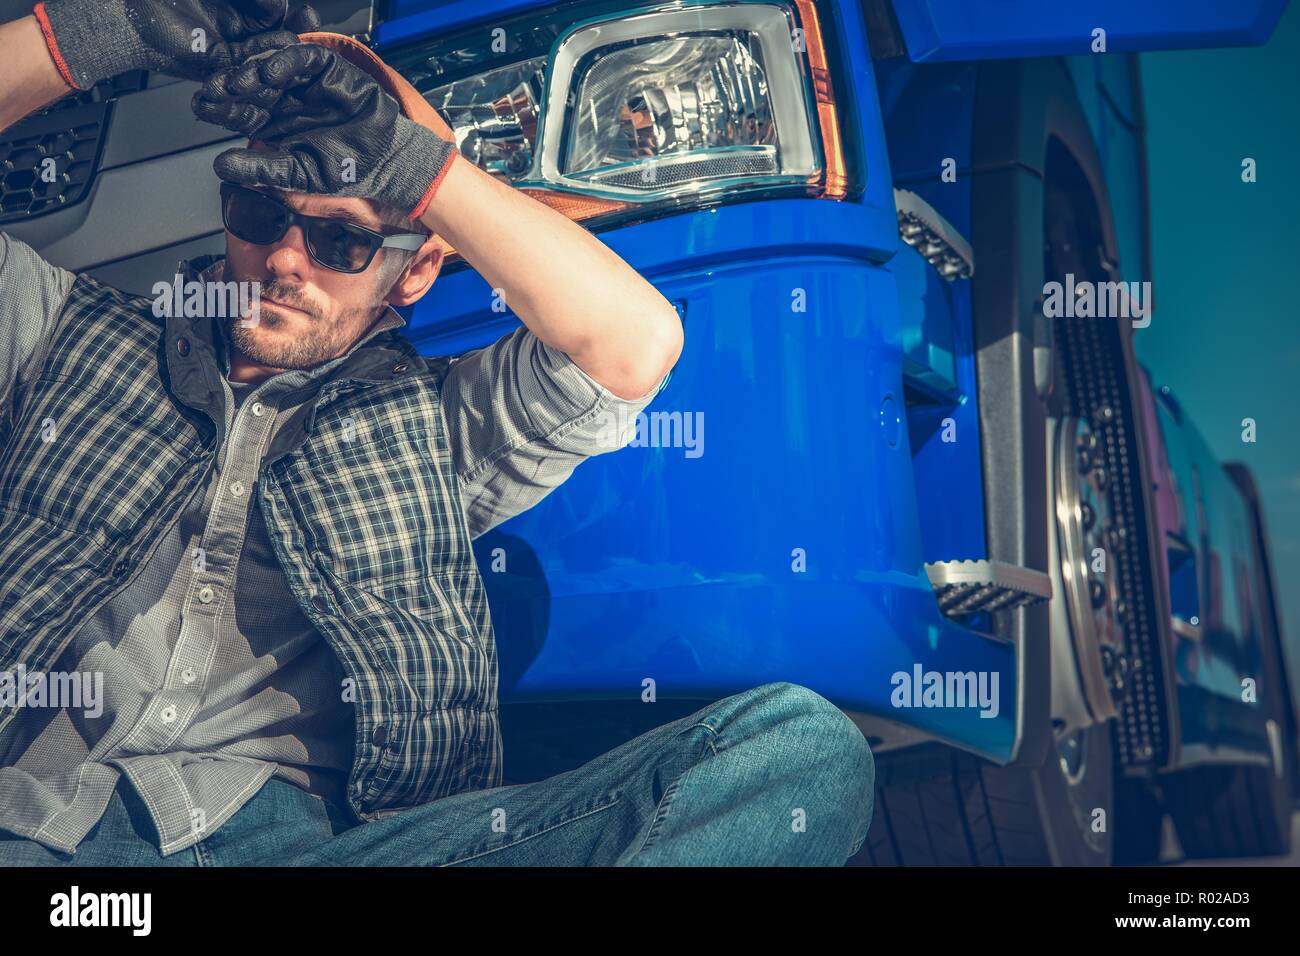 Tired Caucasian Truck Driver in His 30s Resting in Front of His Semi Tractor. Transportation Industry Concept. Stock Photo